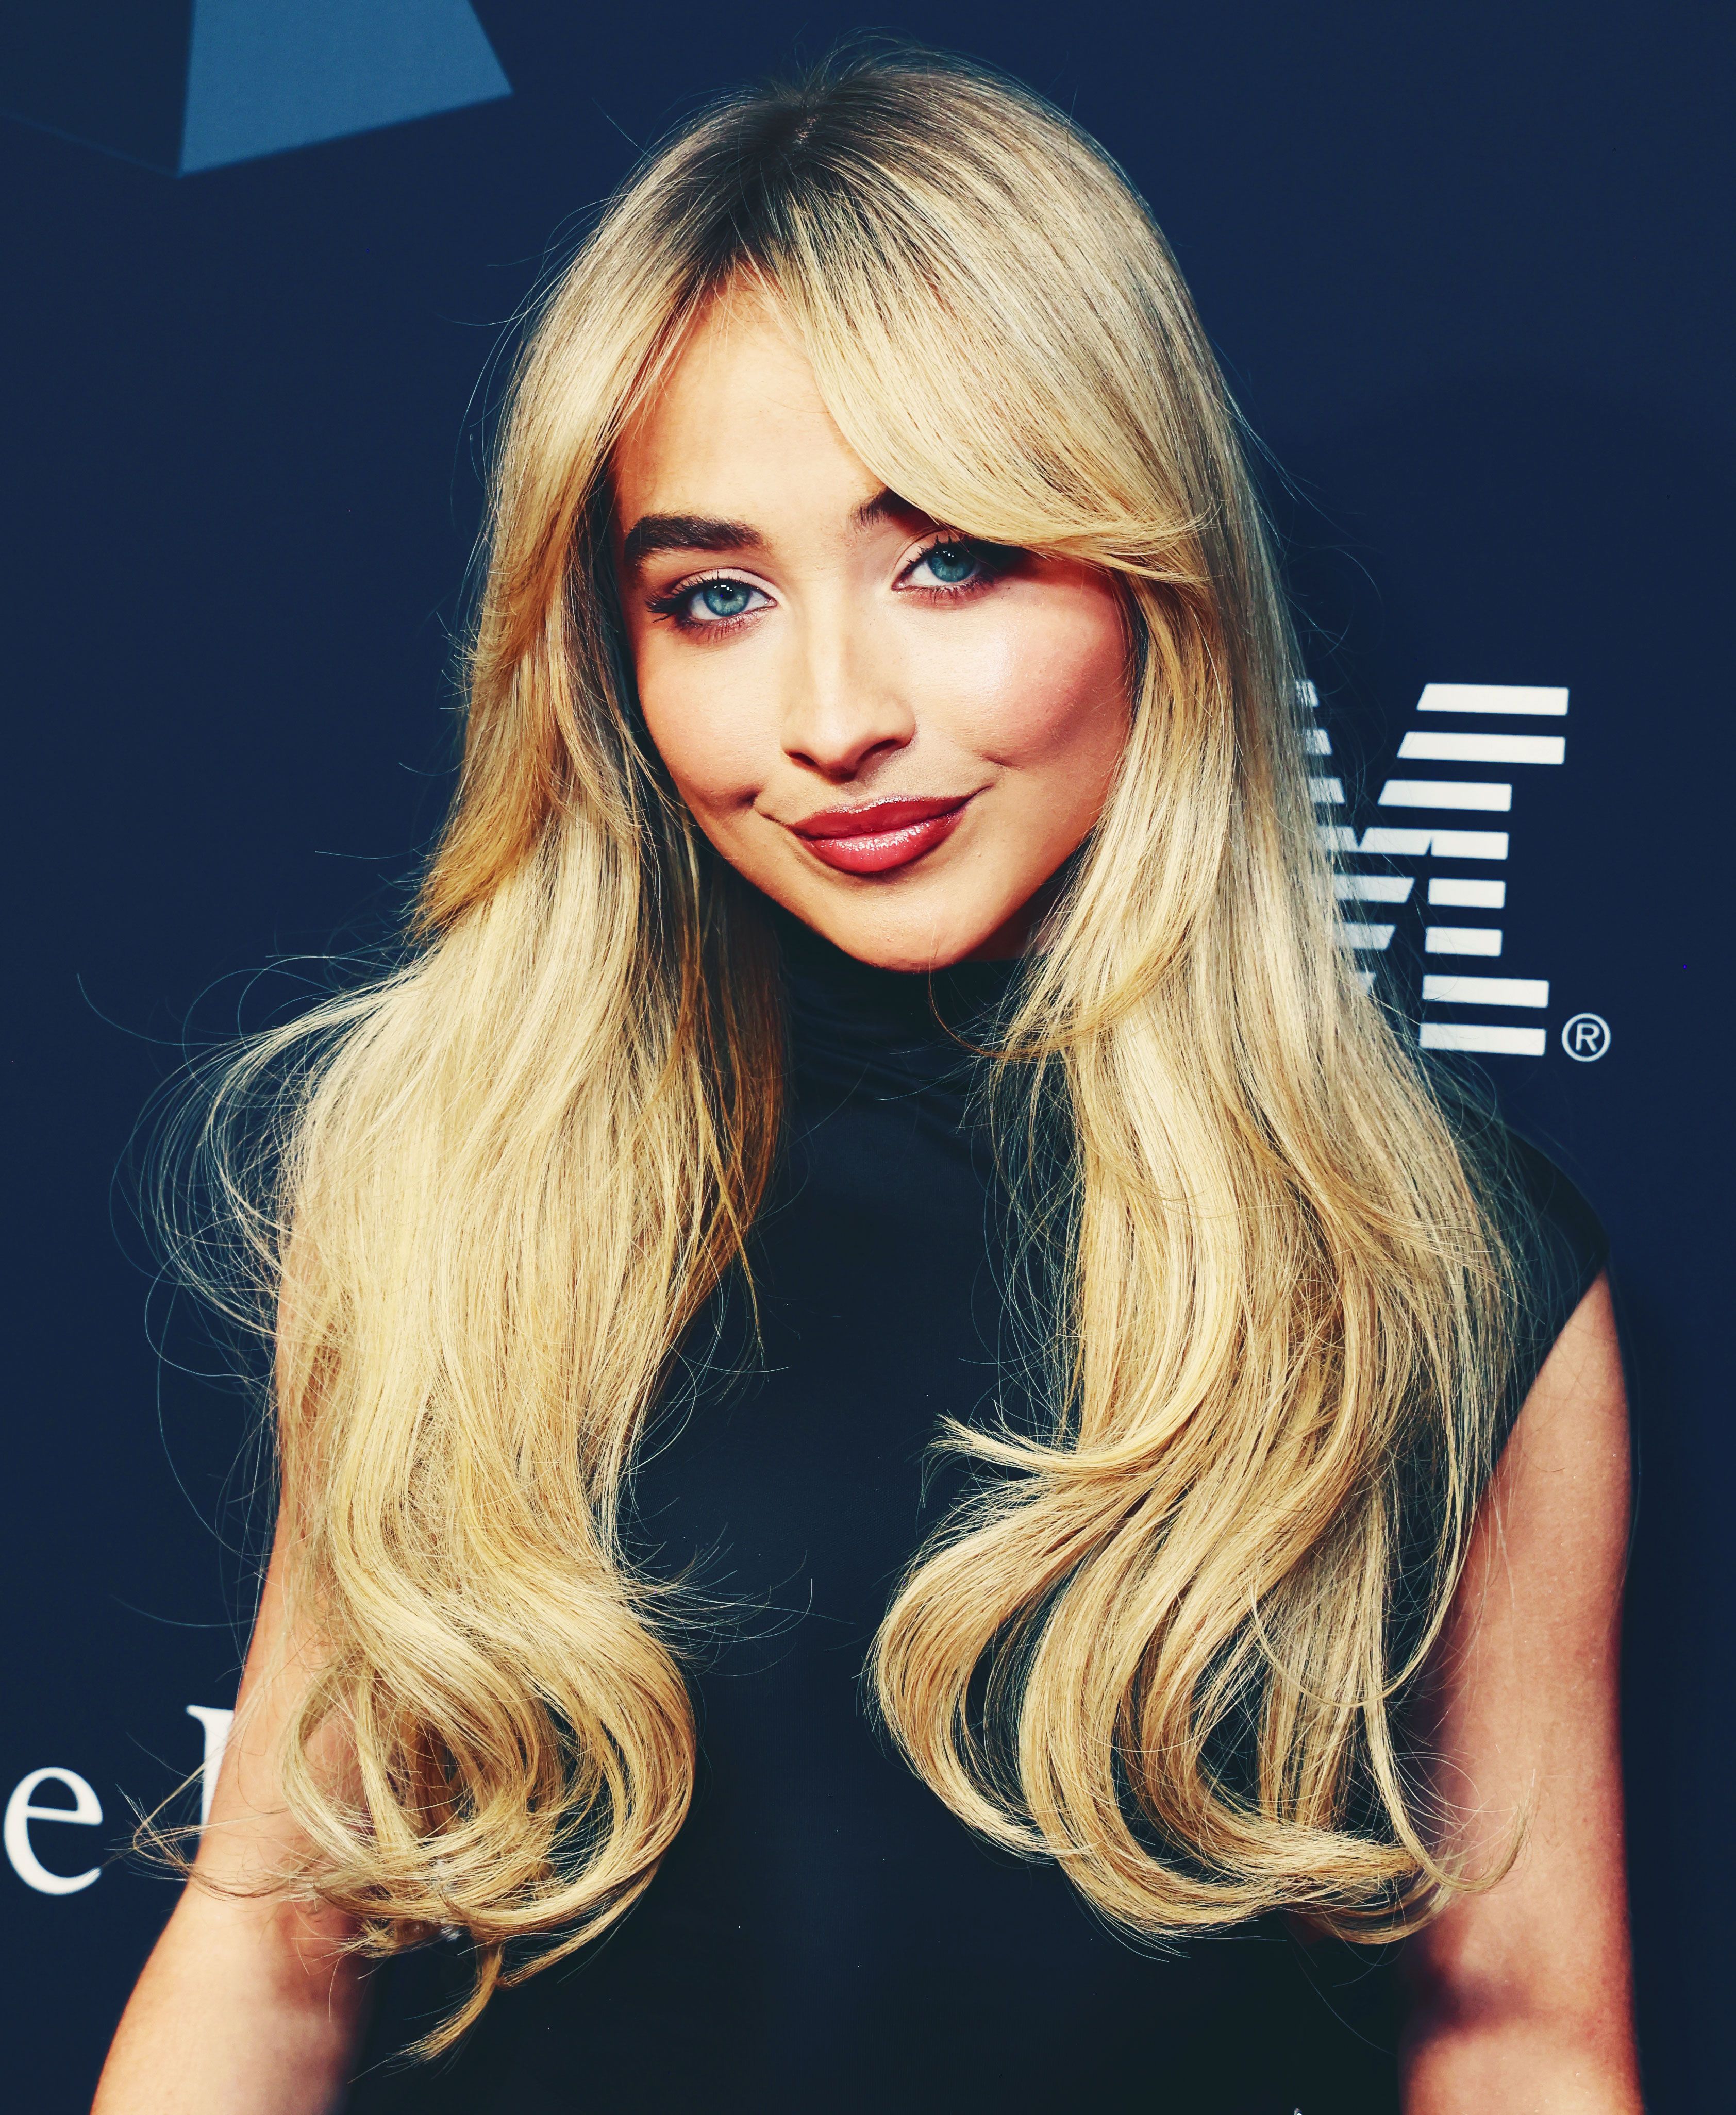 Sabrina Carpenter’s Advice to Herself? ‘Don’t Get Pregnant’